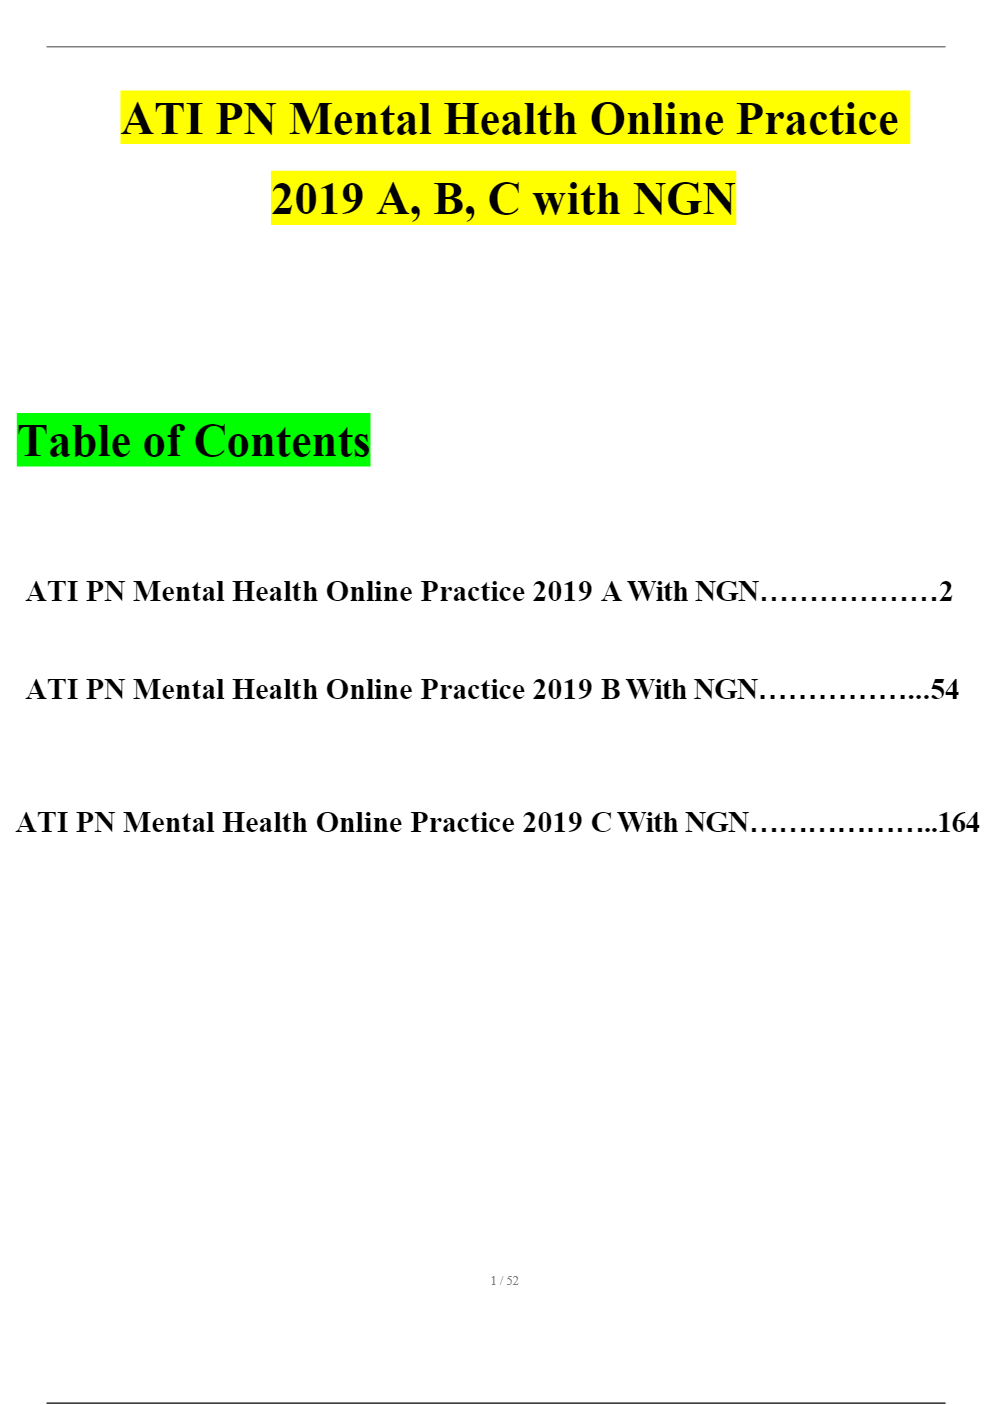 ATI PN Mental Health Online Practice 2019 A, B, C with NGN Questions